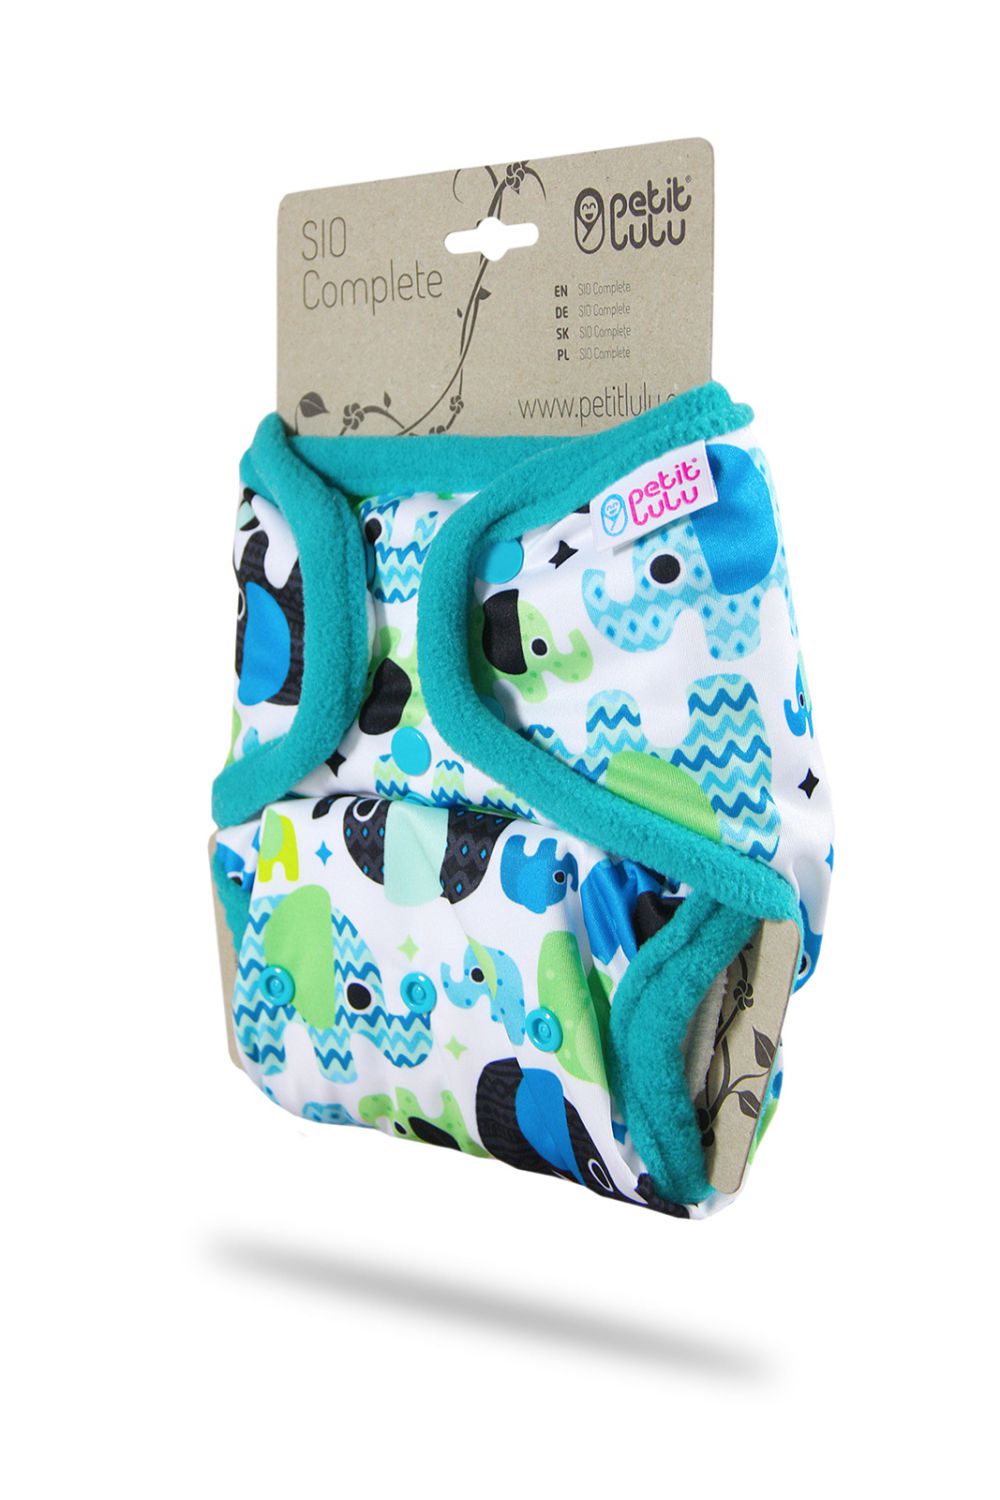 Petit Lulu One Size SIO Complete with Inserts (Snaps) Petit Lulu pattern: Baby Elephant (blue)